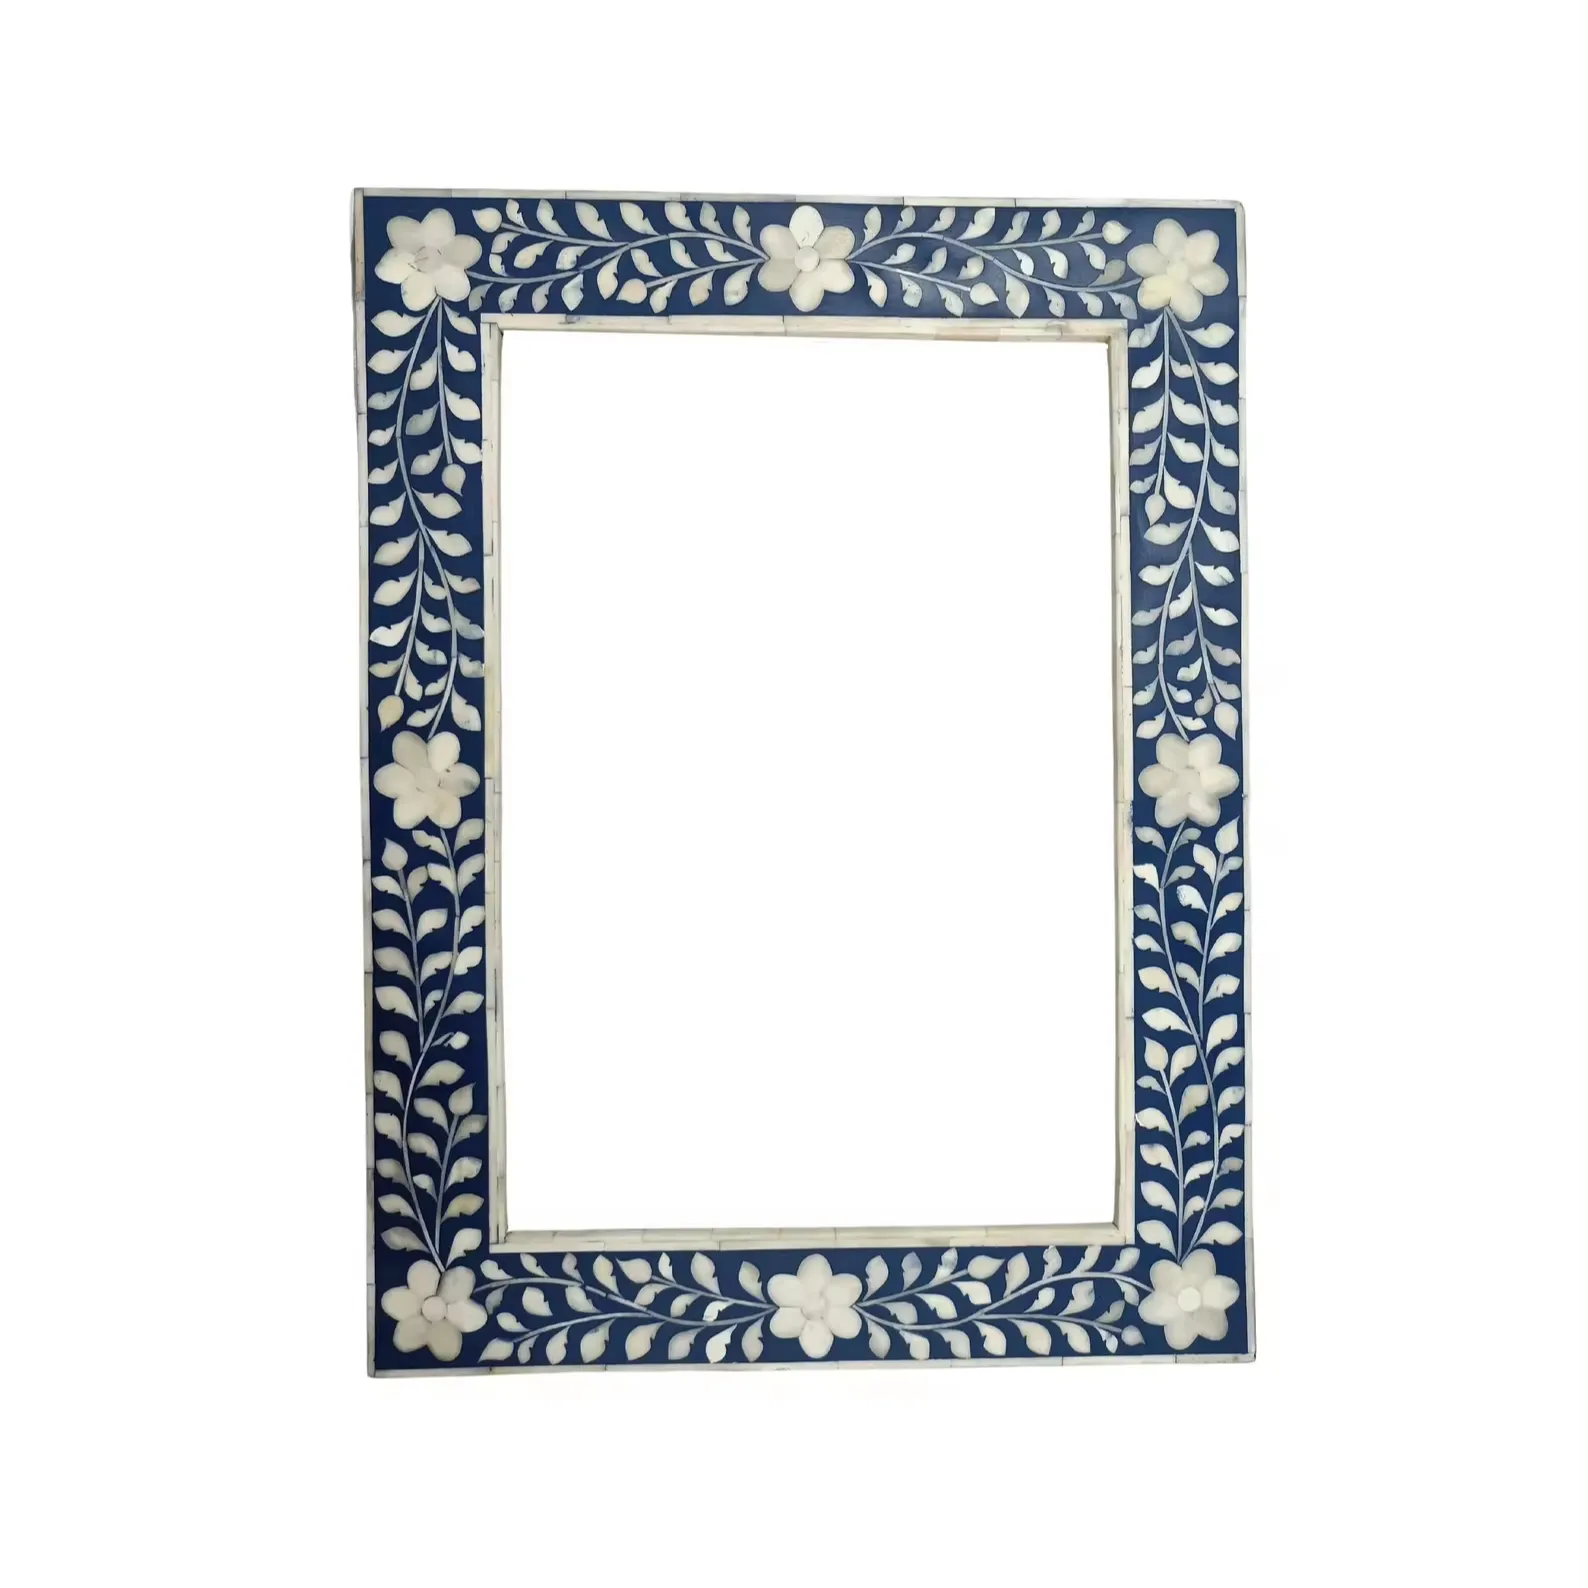 Hand Made Square Bone Inlay Wall Mirror Frame Antique Bone Mirror Frame Decorative For Living Room Bone Craft By Mehak Impex